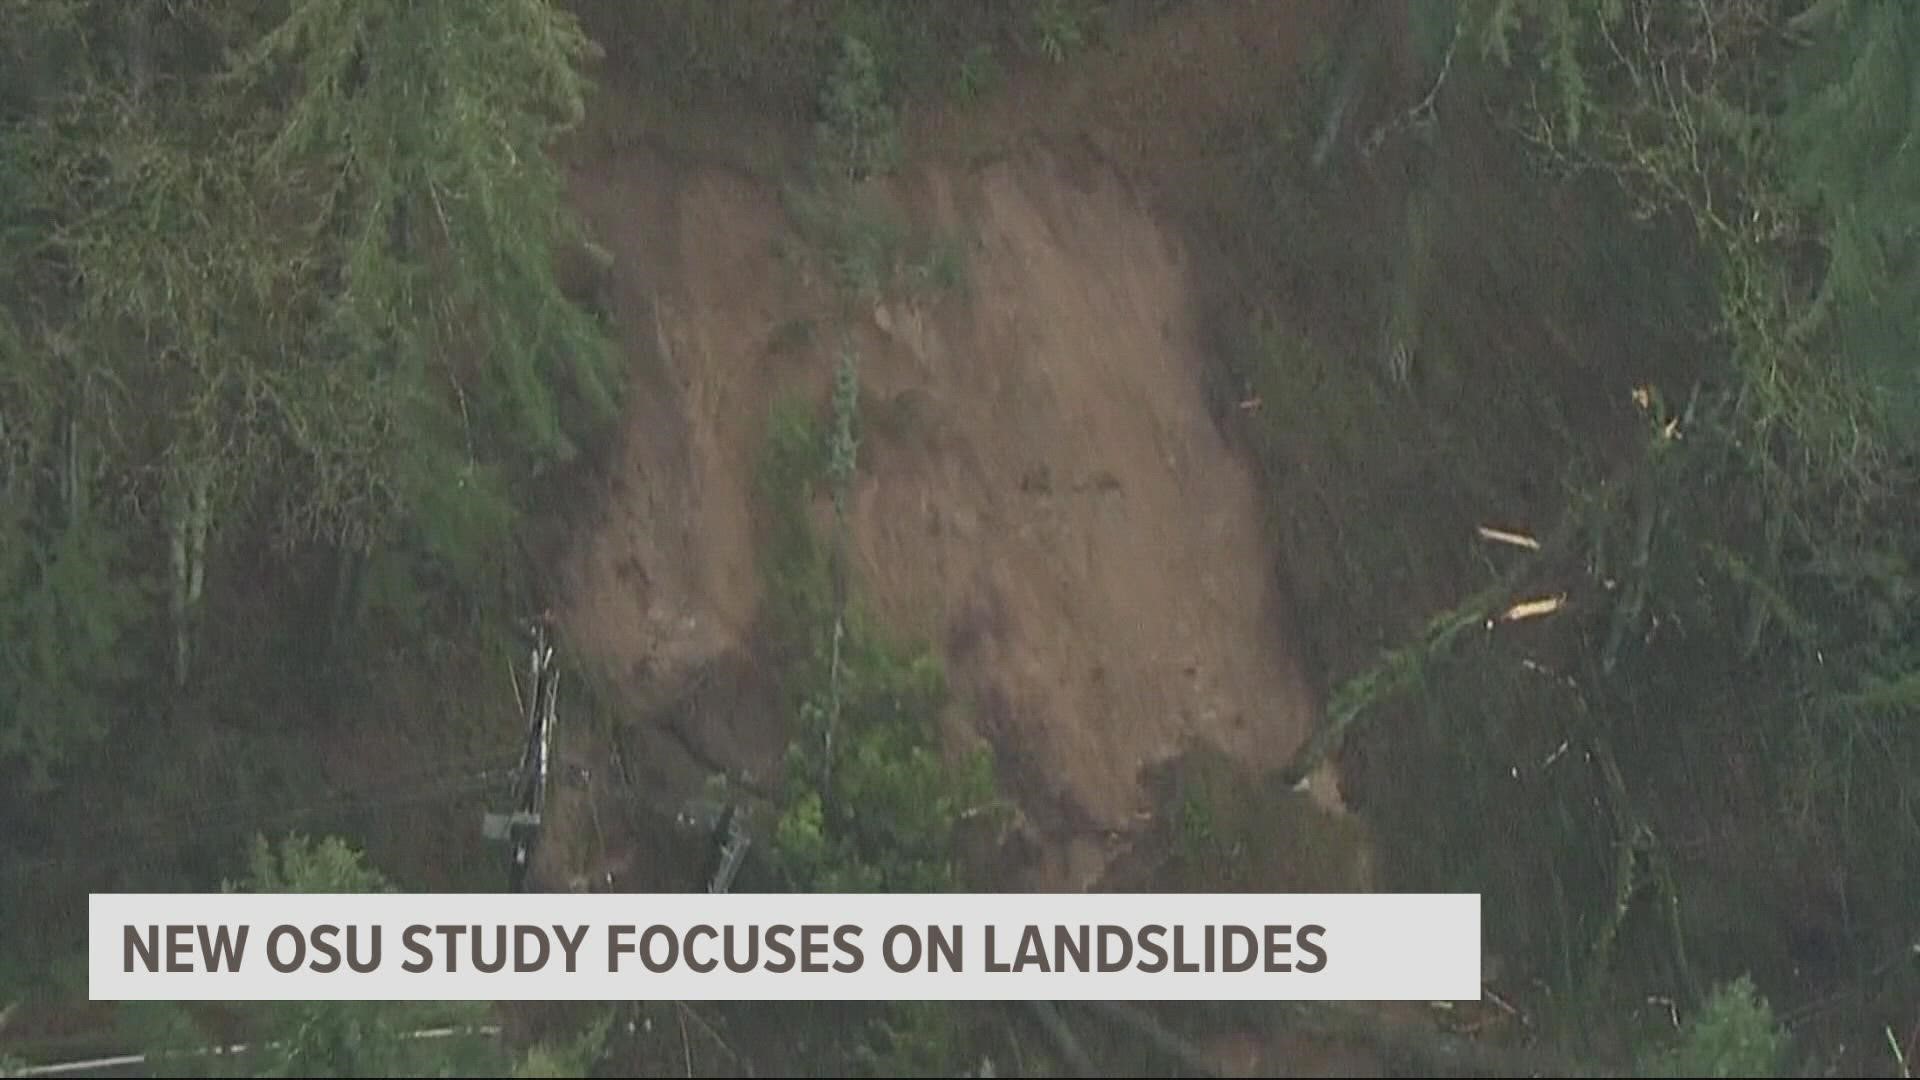 Oregon State University has just completed a long-term study that focuses on landslides, how often they happen and how strong they are